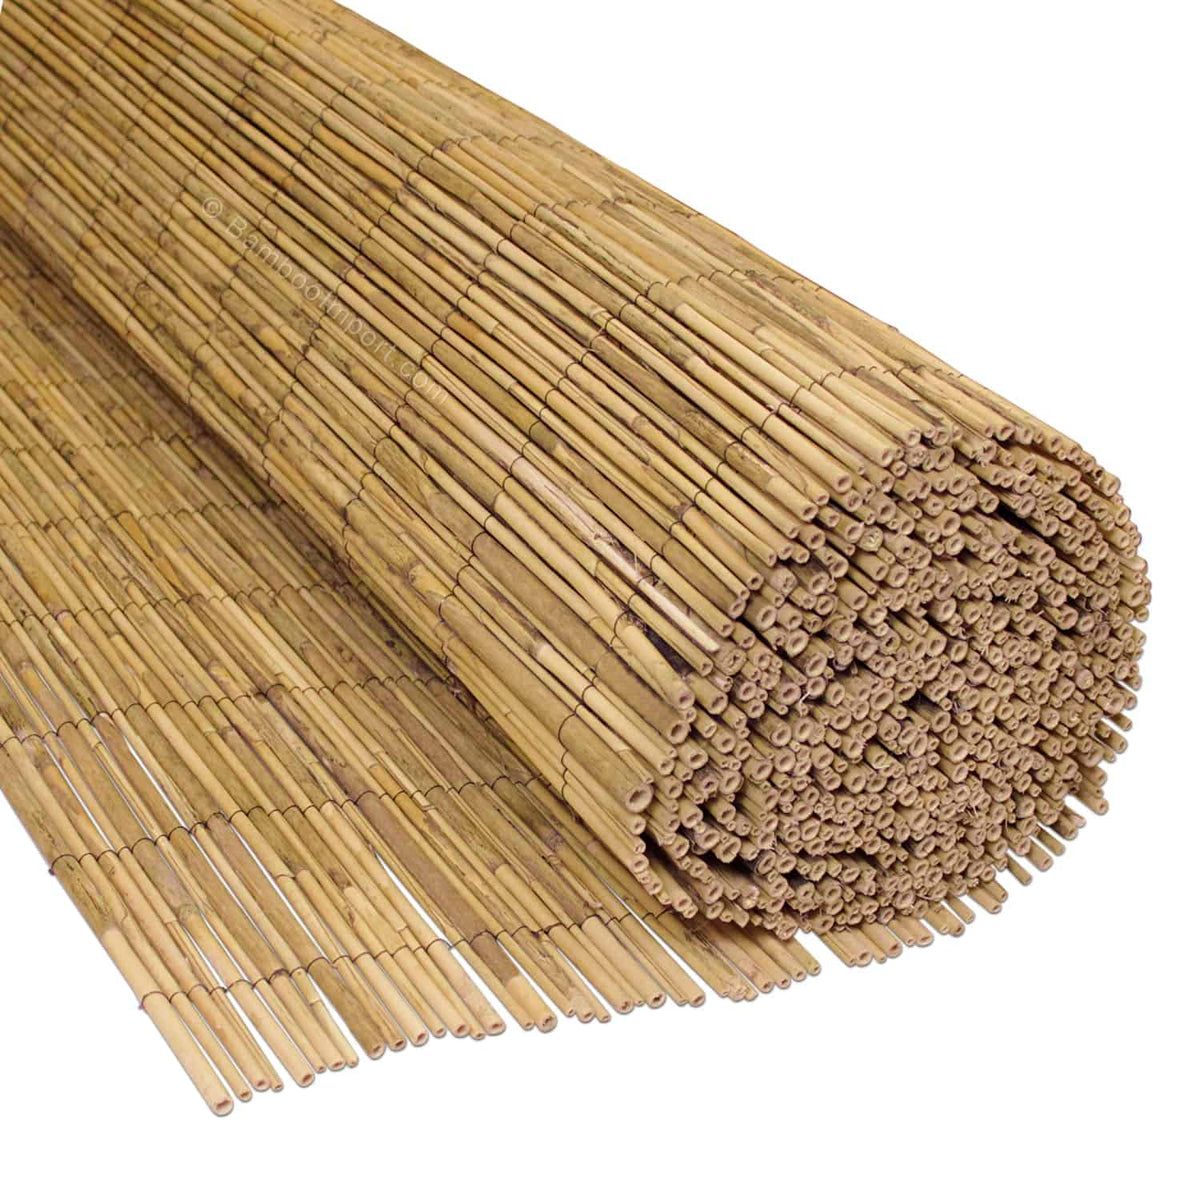 Reed mats on a roll - image14